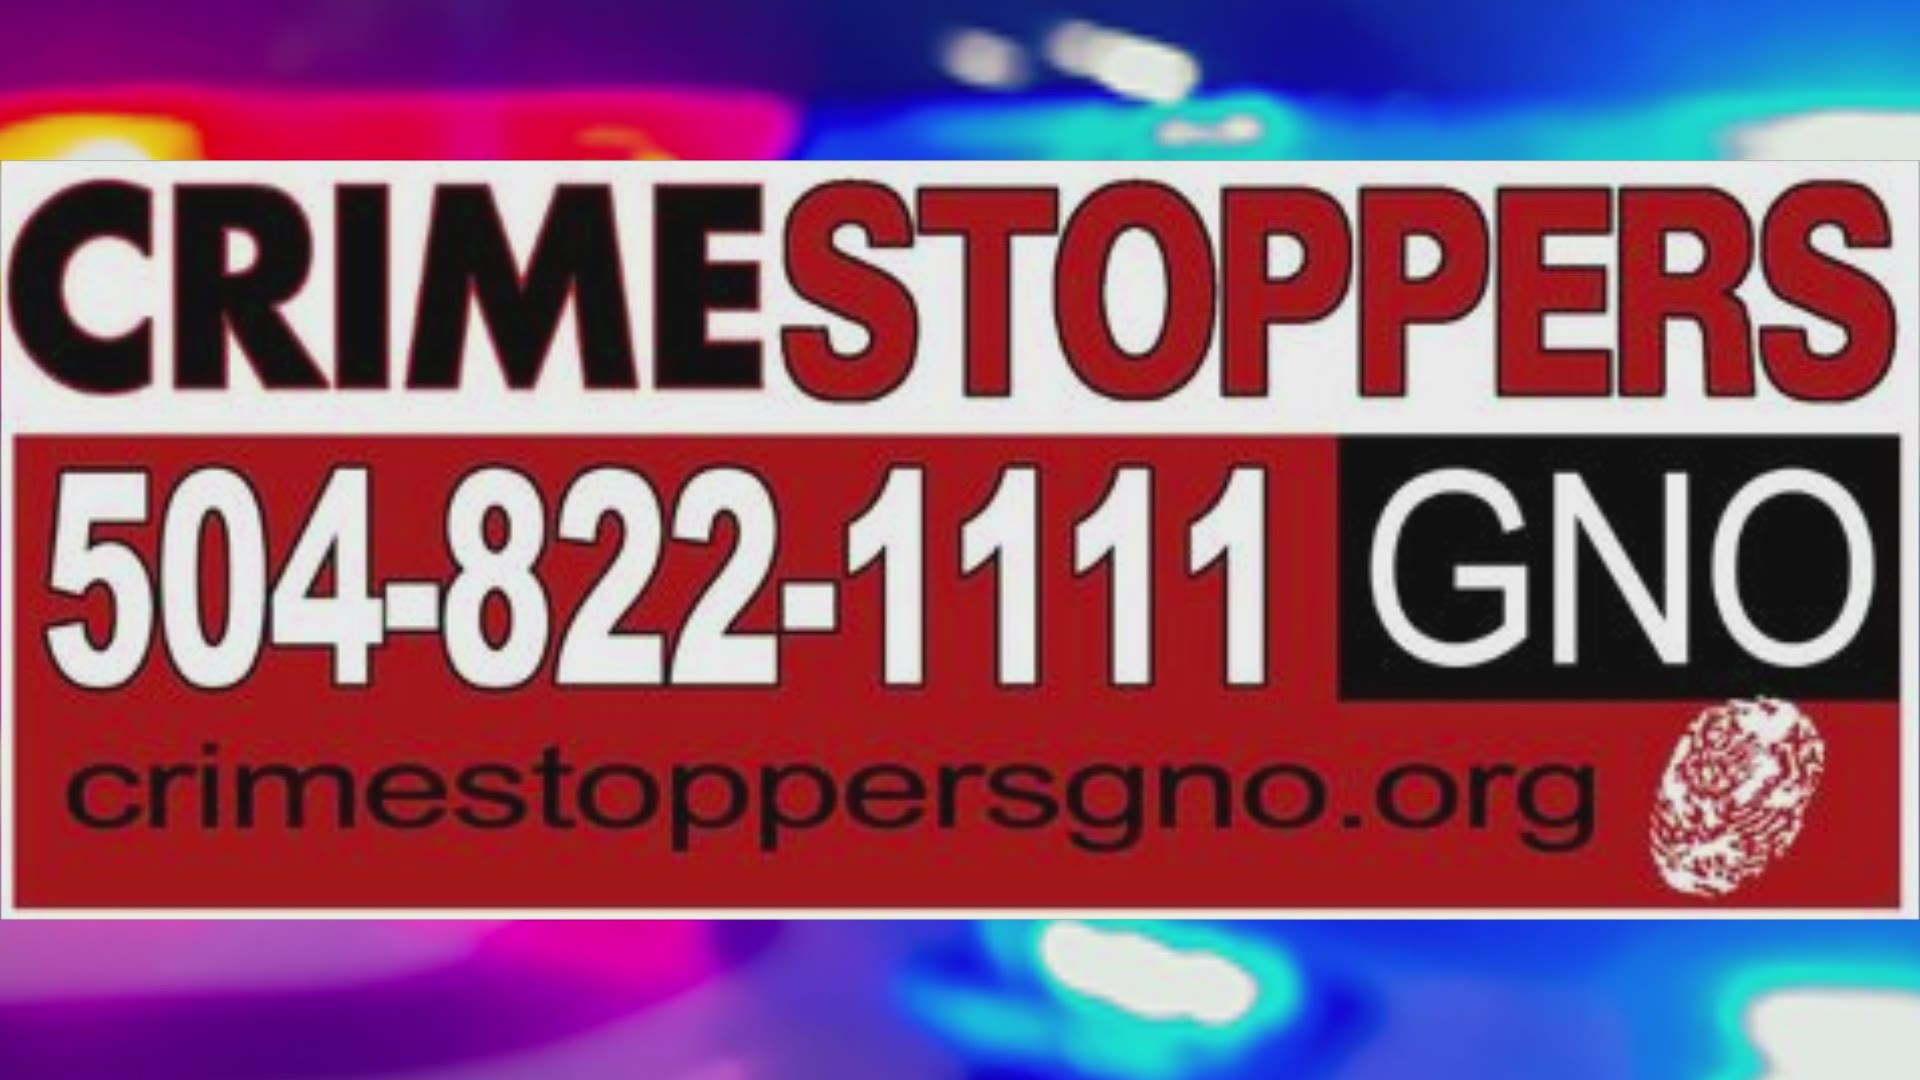 Darlene Cusanza, Crimestoppers President & CEO shares updates on recent crime